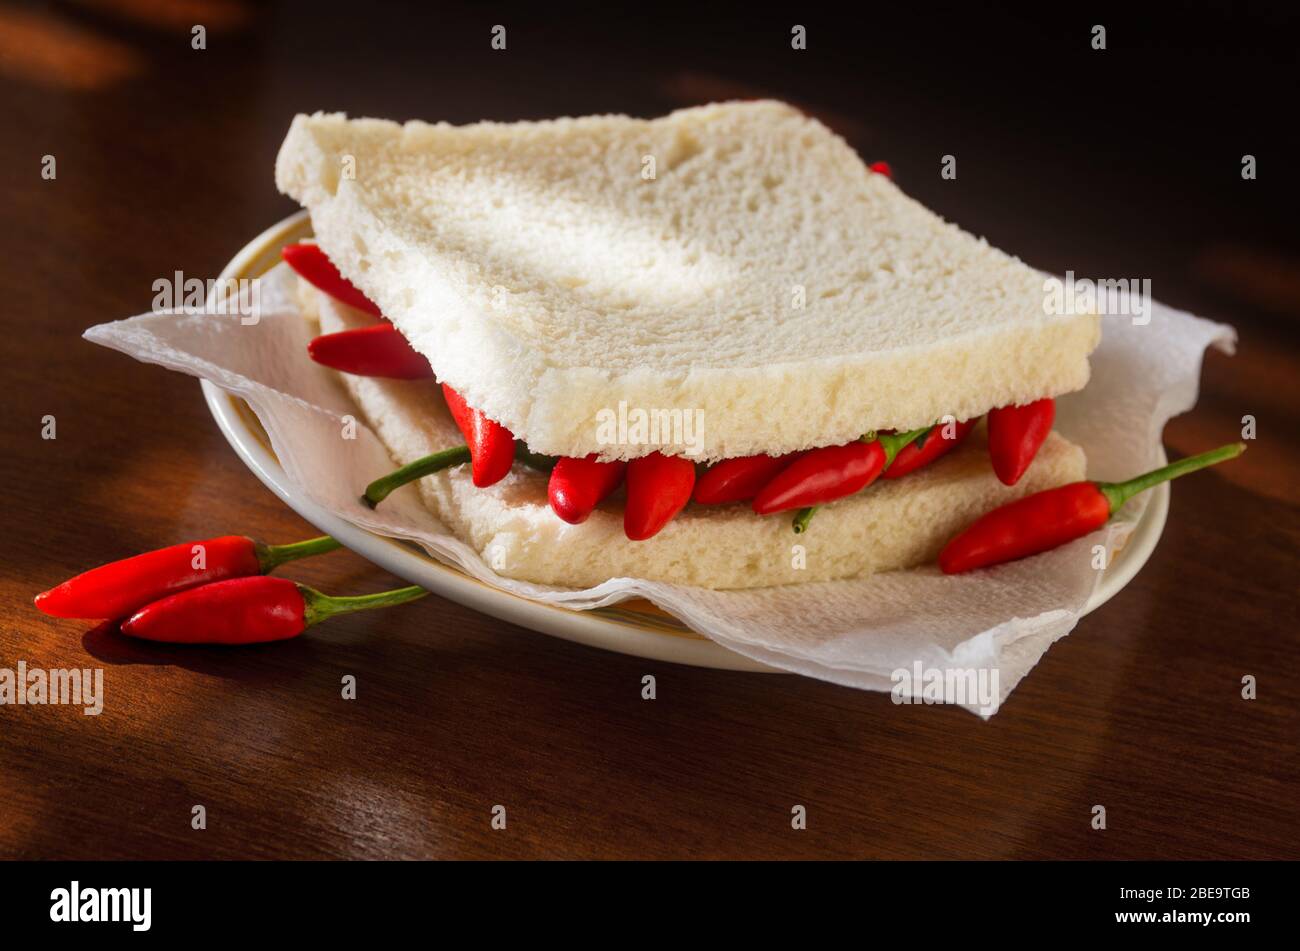 Closeup on a spicy hot chili pepper sandwich in a plate Stock Photo